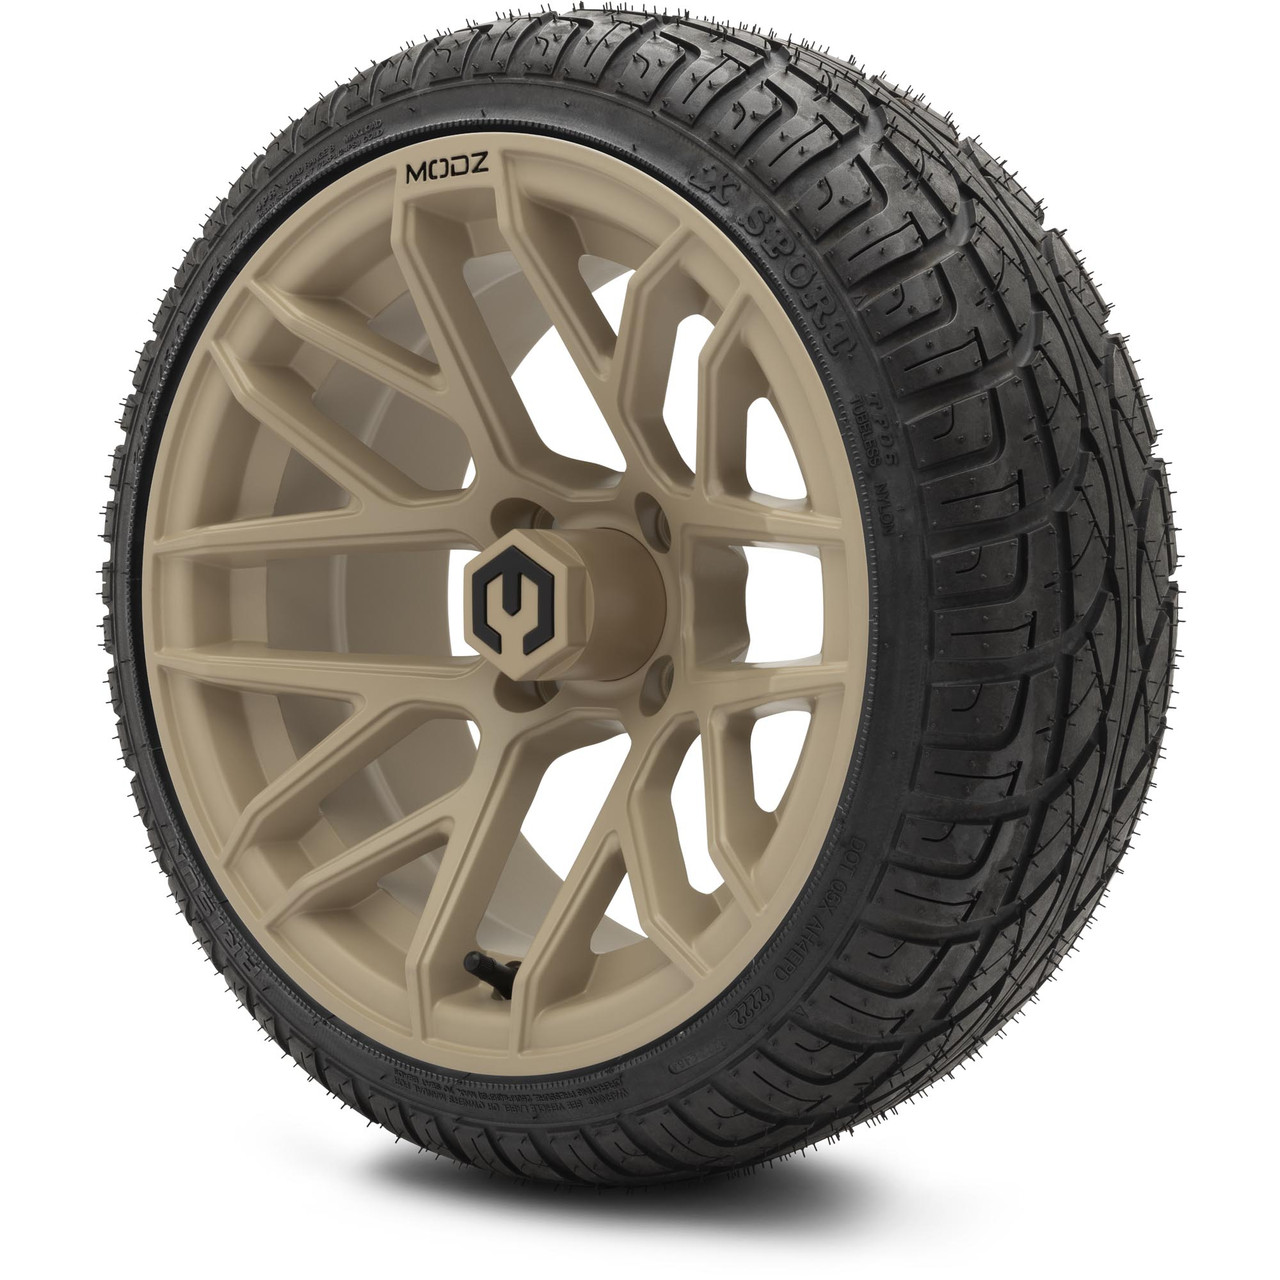 Street, Sport, and Offroad Wheels